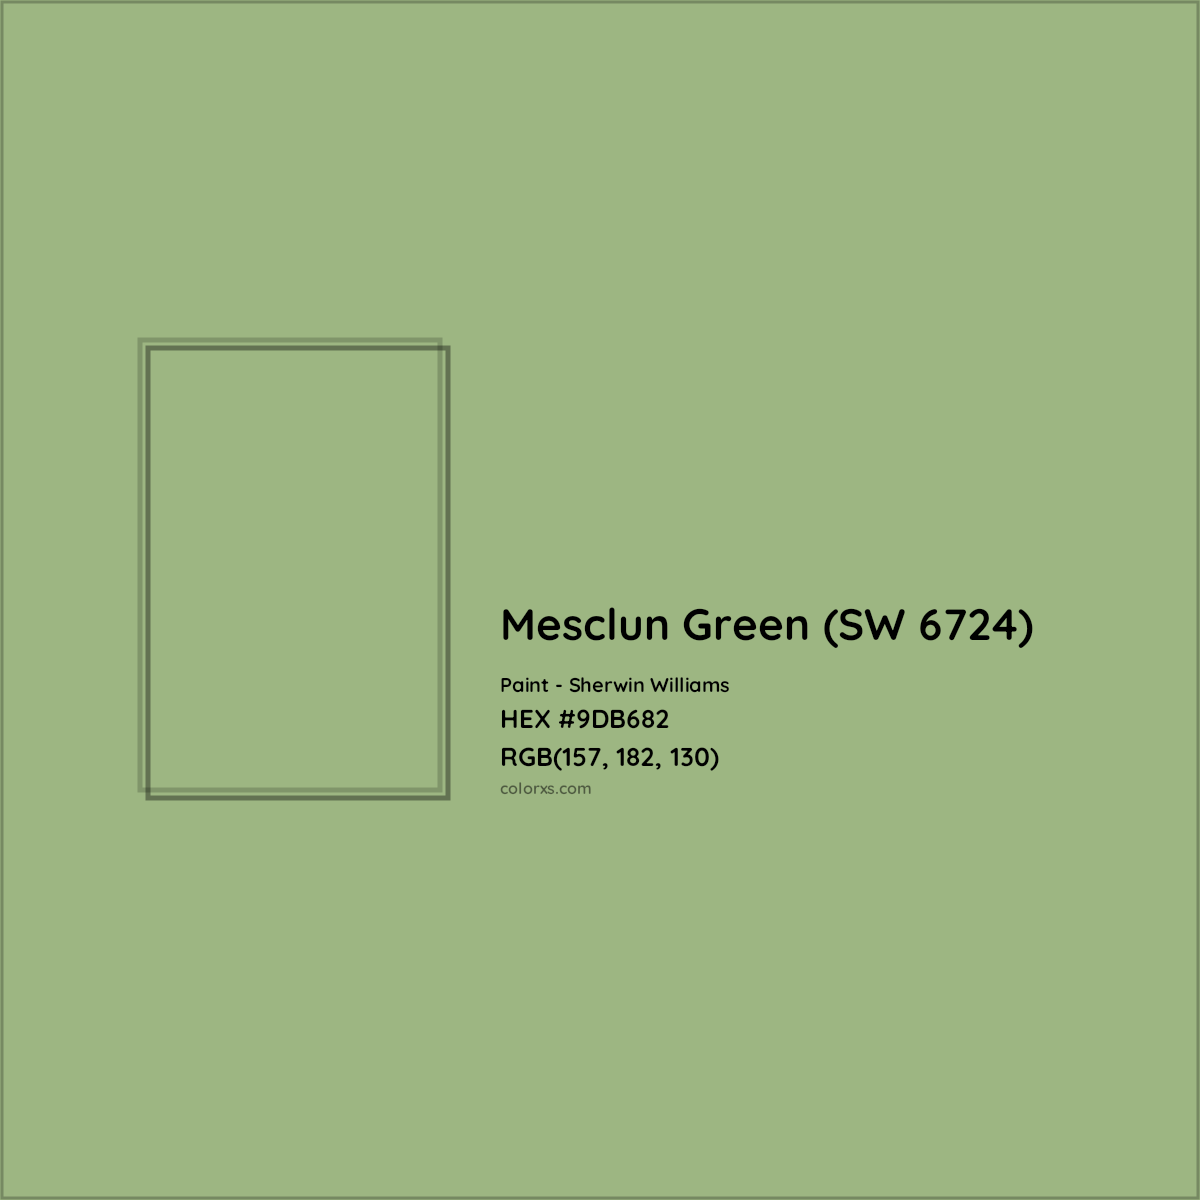 HEX #9DB682 Mesclun Green (SW 6724) Paint Sherwin Williams - Color Code